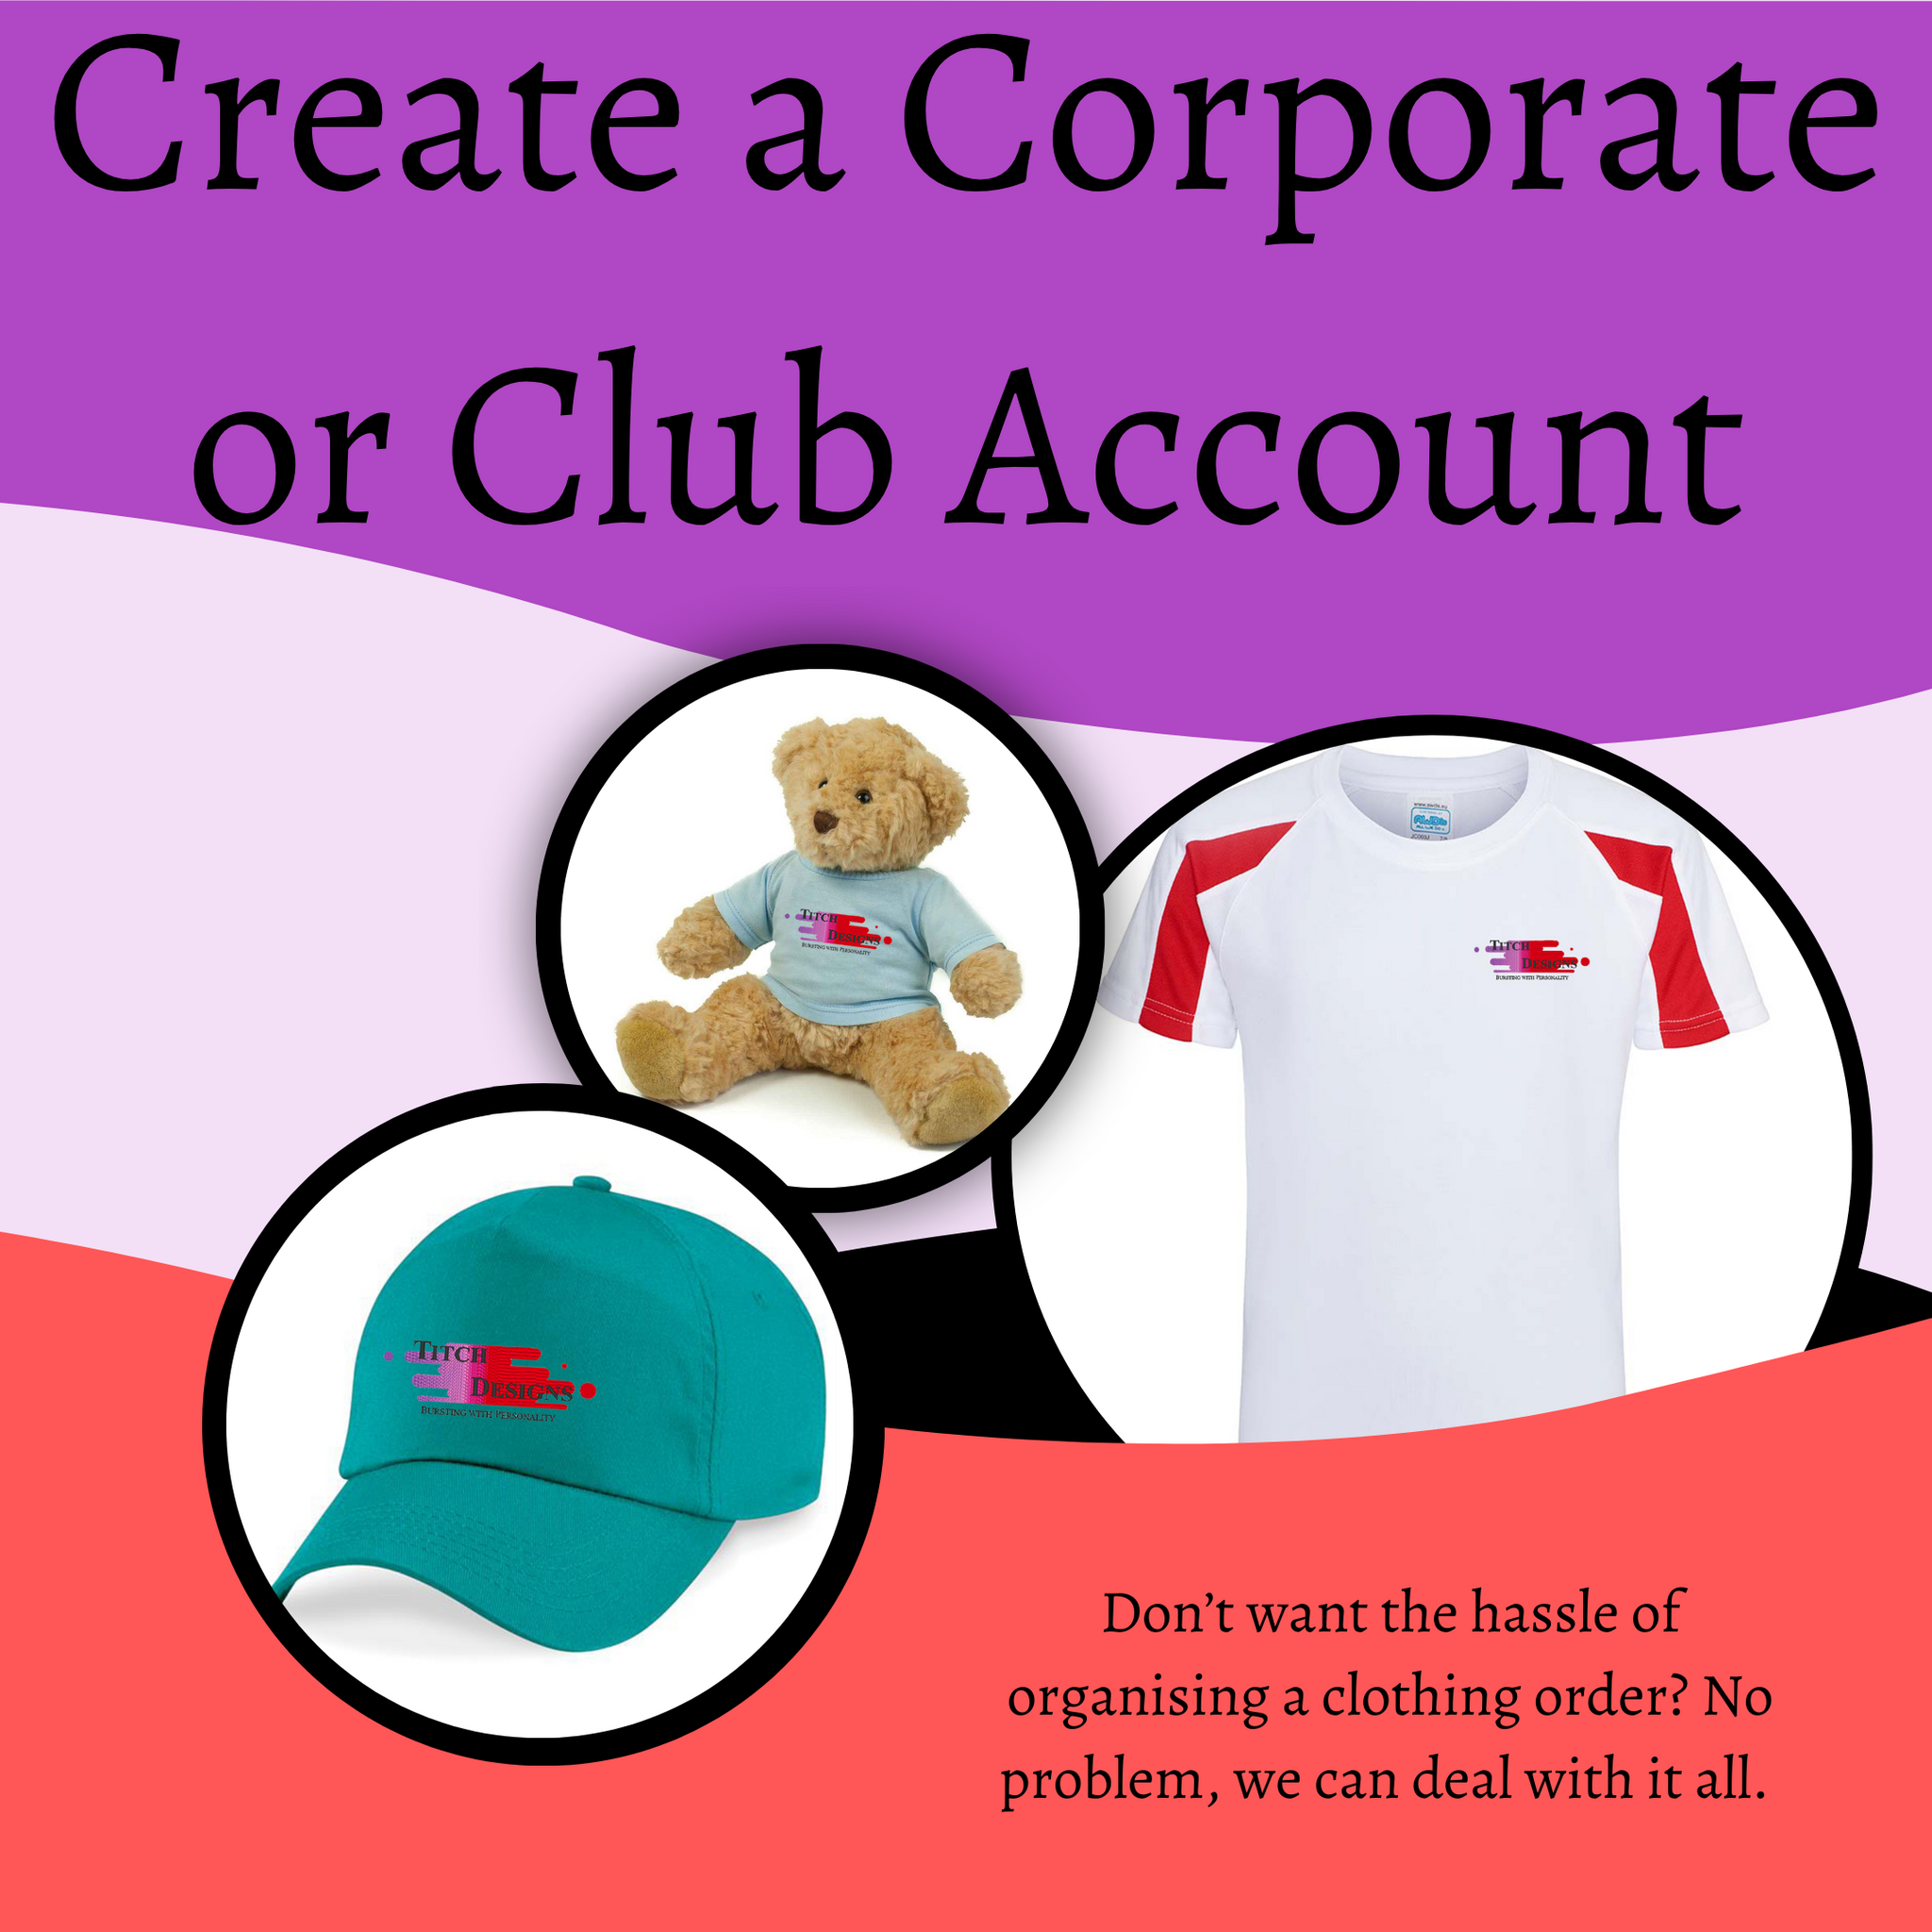 Setting up a Corporate or Club Account